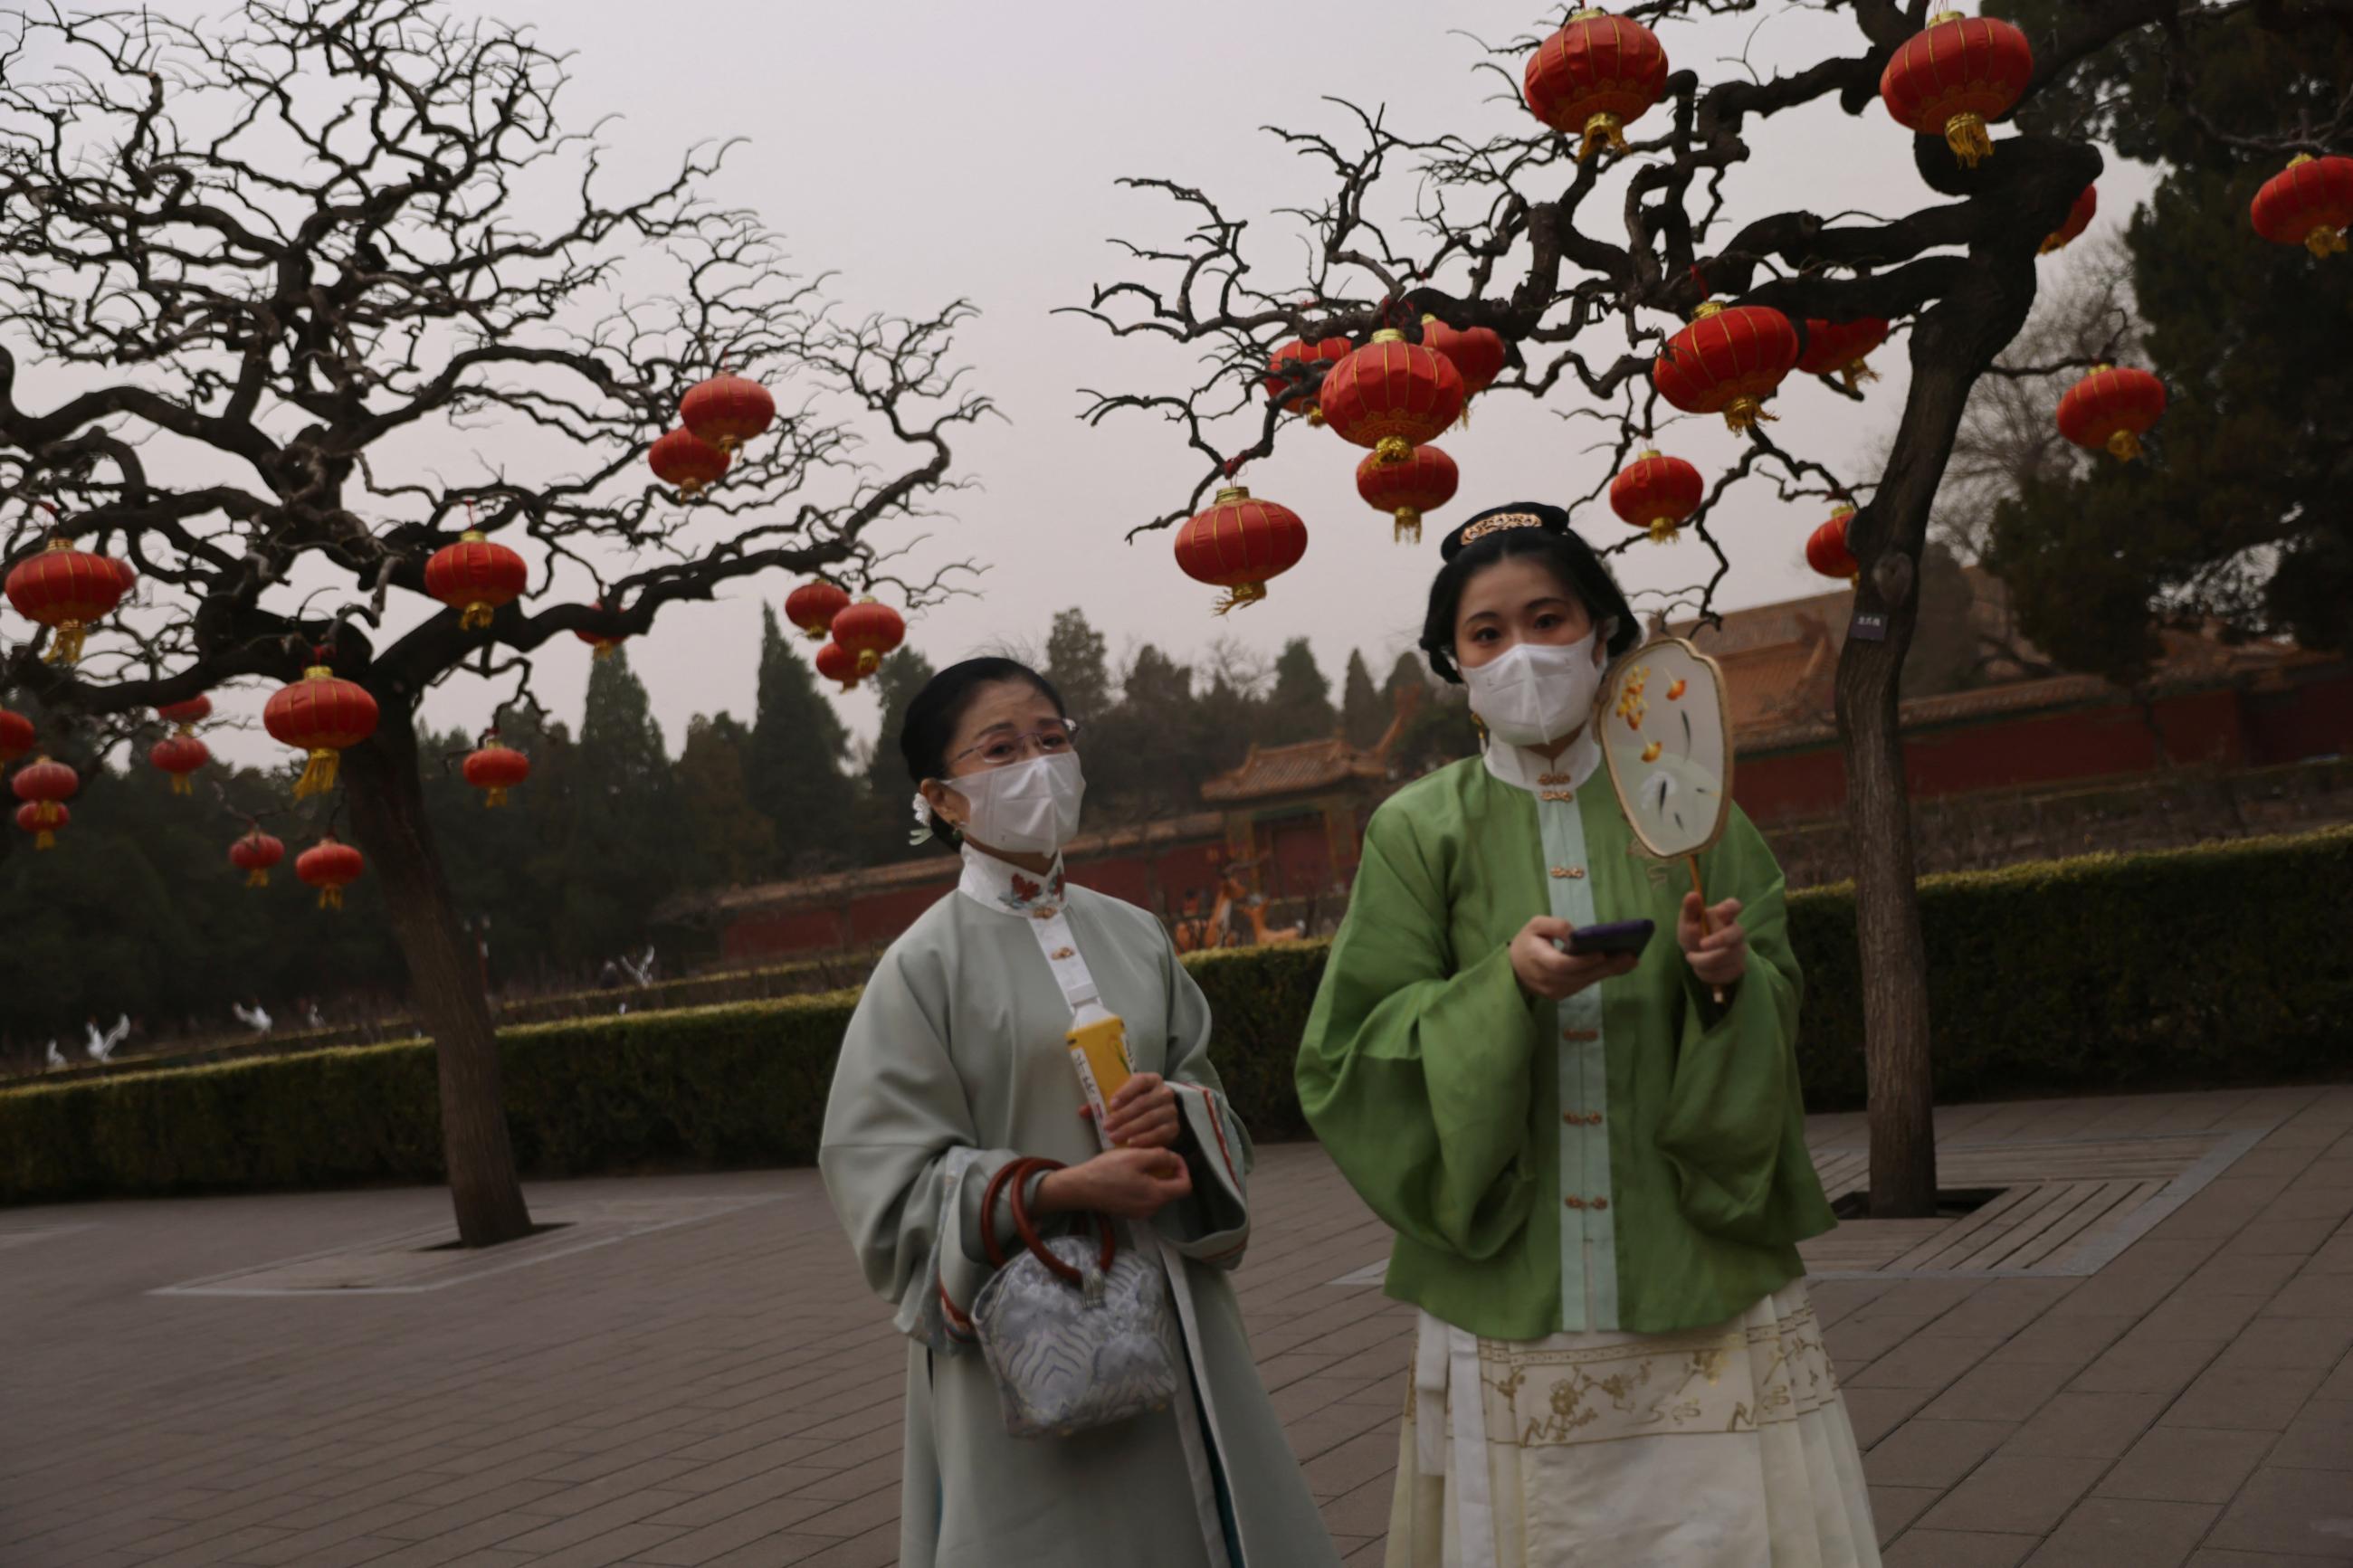 Women dressed in traditional hanfu clothing walk at Jingshan Park as the city is shrouded in smog amid a sandstorm in Beijing, China, on March 10, 2023. REUTERS/Tingshu Wang